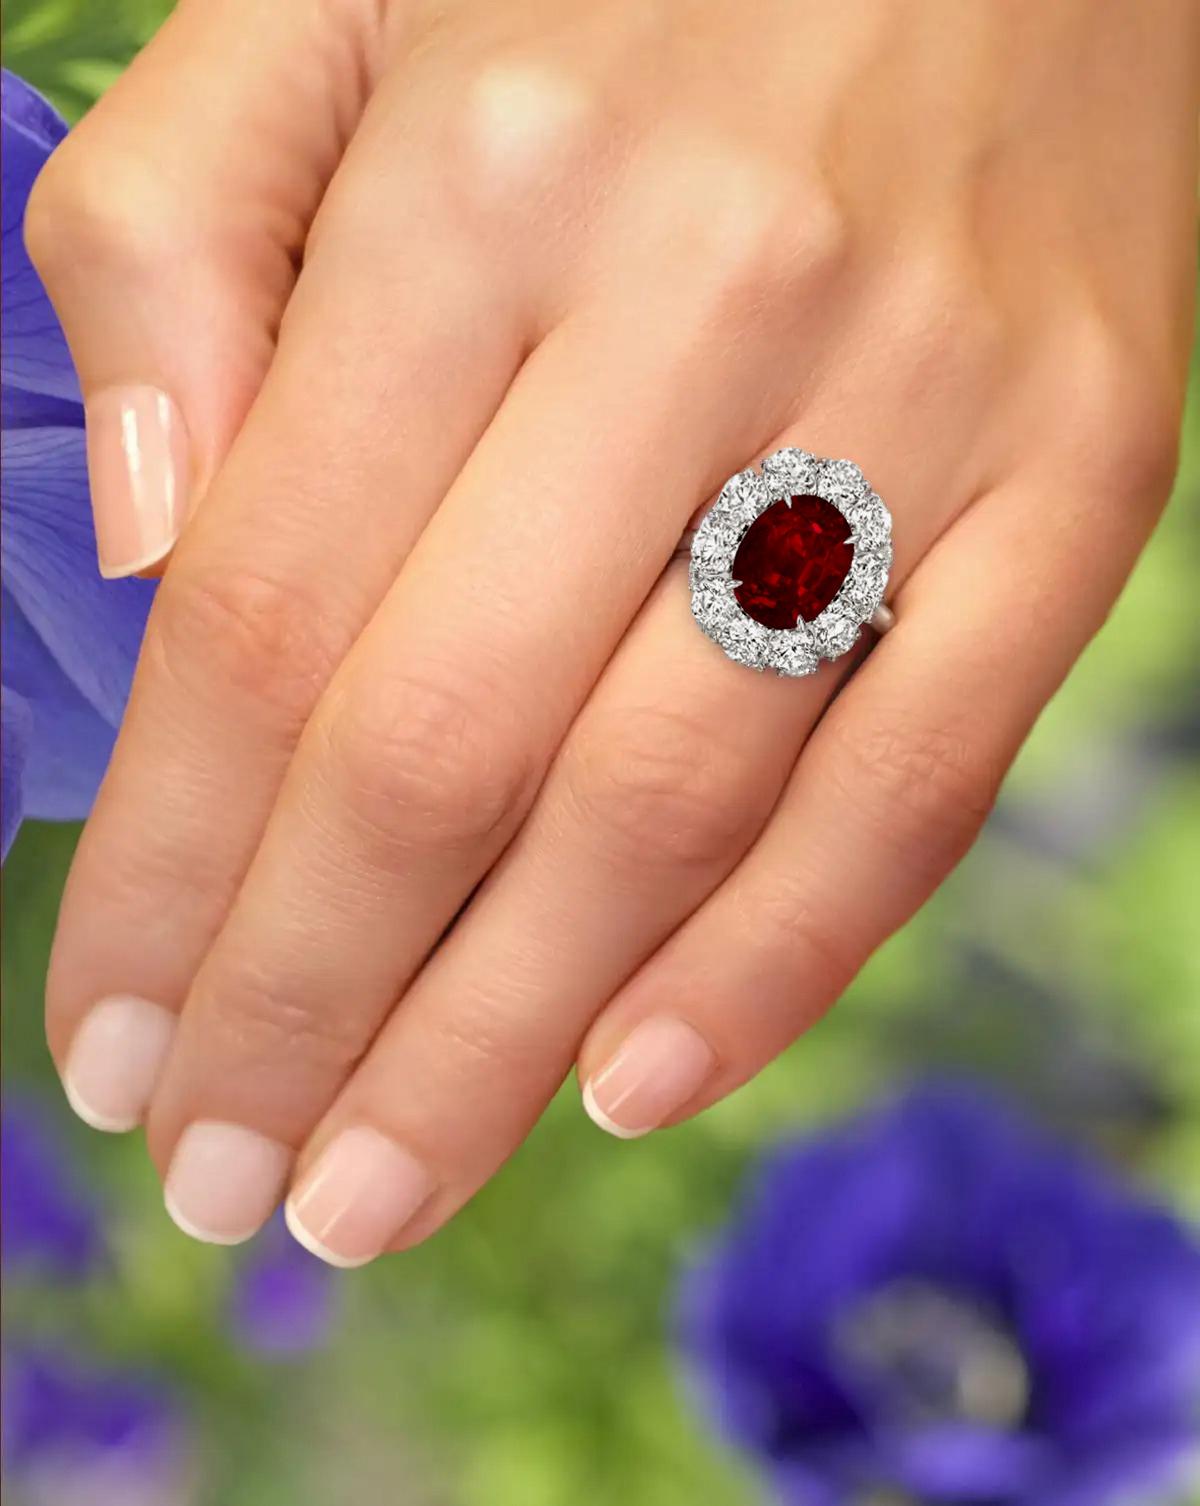 An exquisite 5 carat vivid blood red purple oval no-heat ruby commands attention in this extraordinary 18 carats yellow gold and platinum classic ring.

 A halo of approximately 1.50 carats of bright white (E/F) and (VS) diamonds encircle the